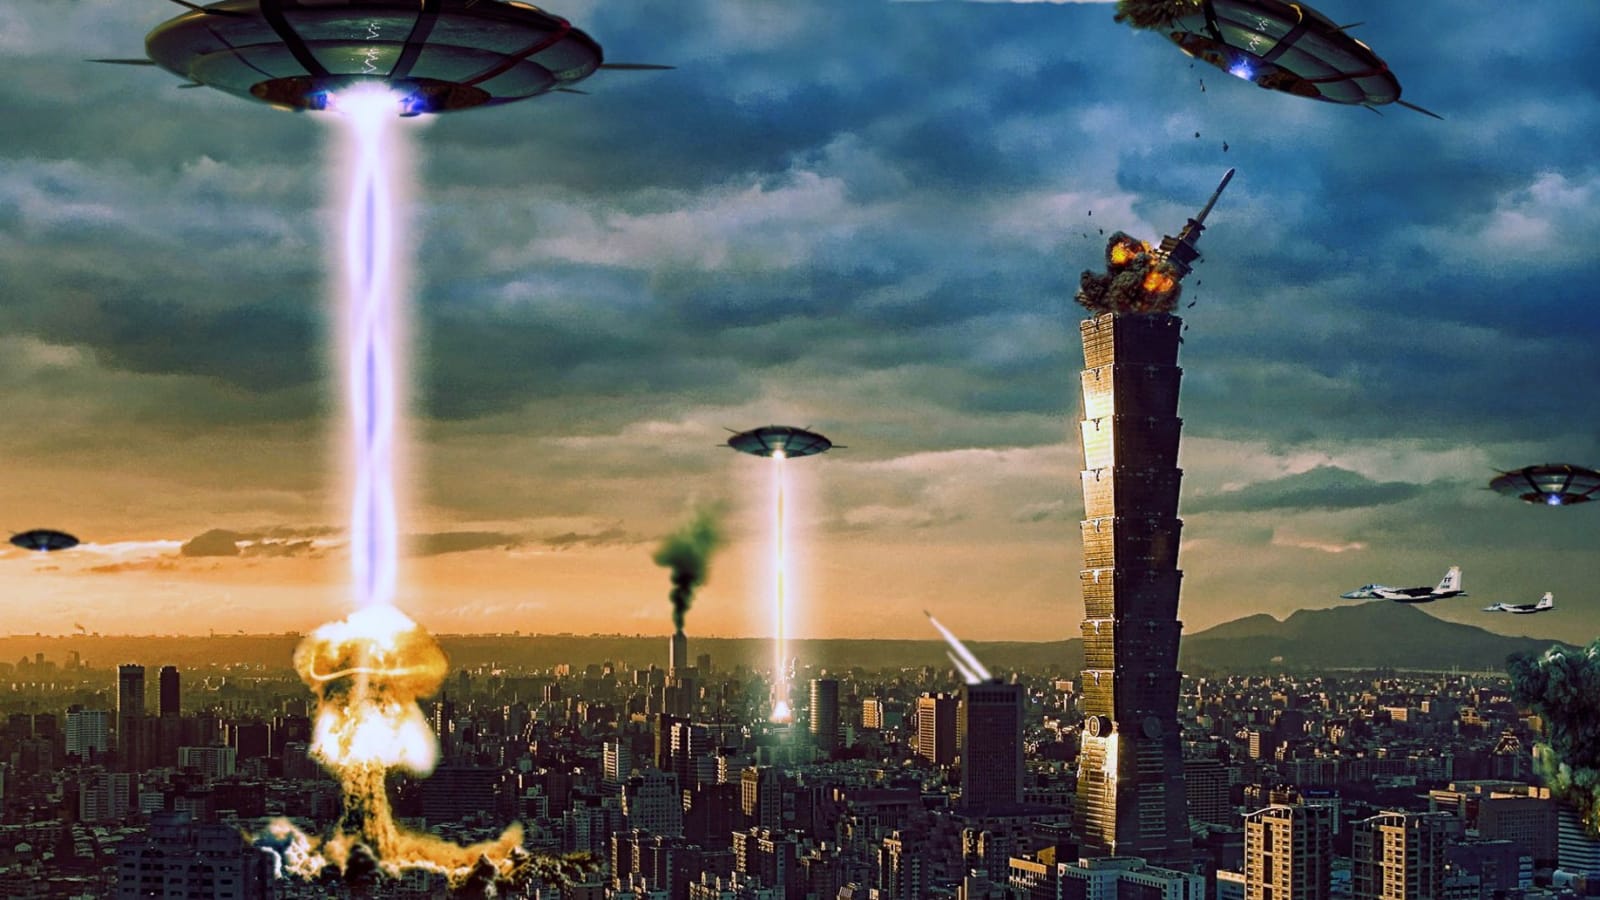 Should we expect an alien invasion?